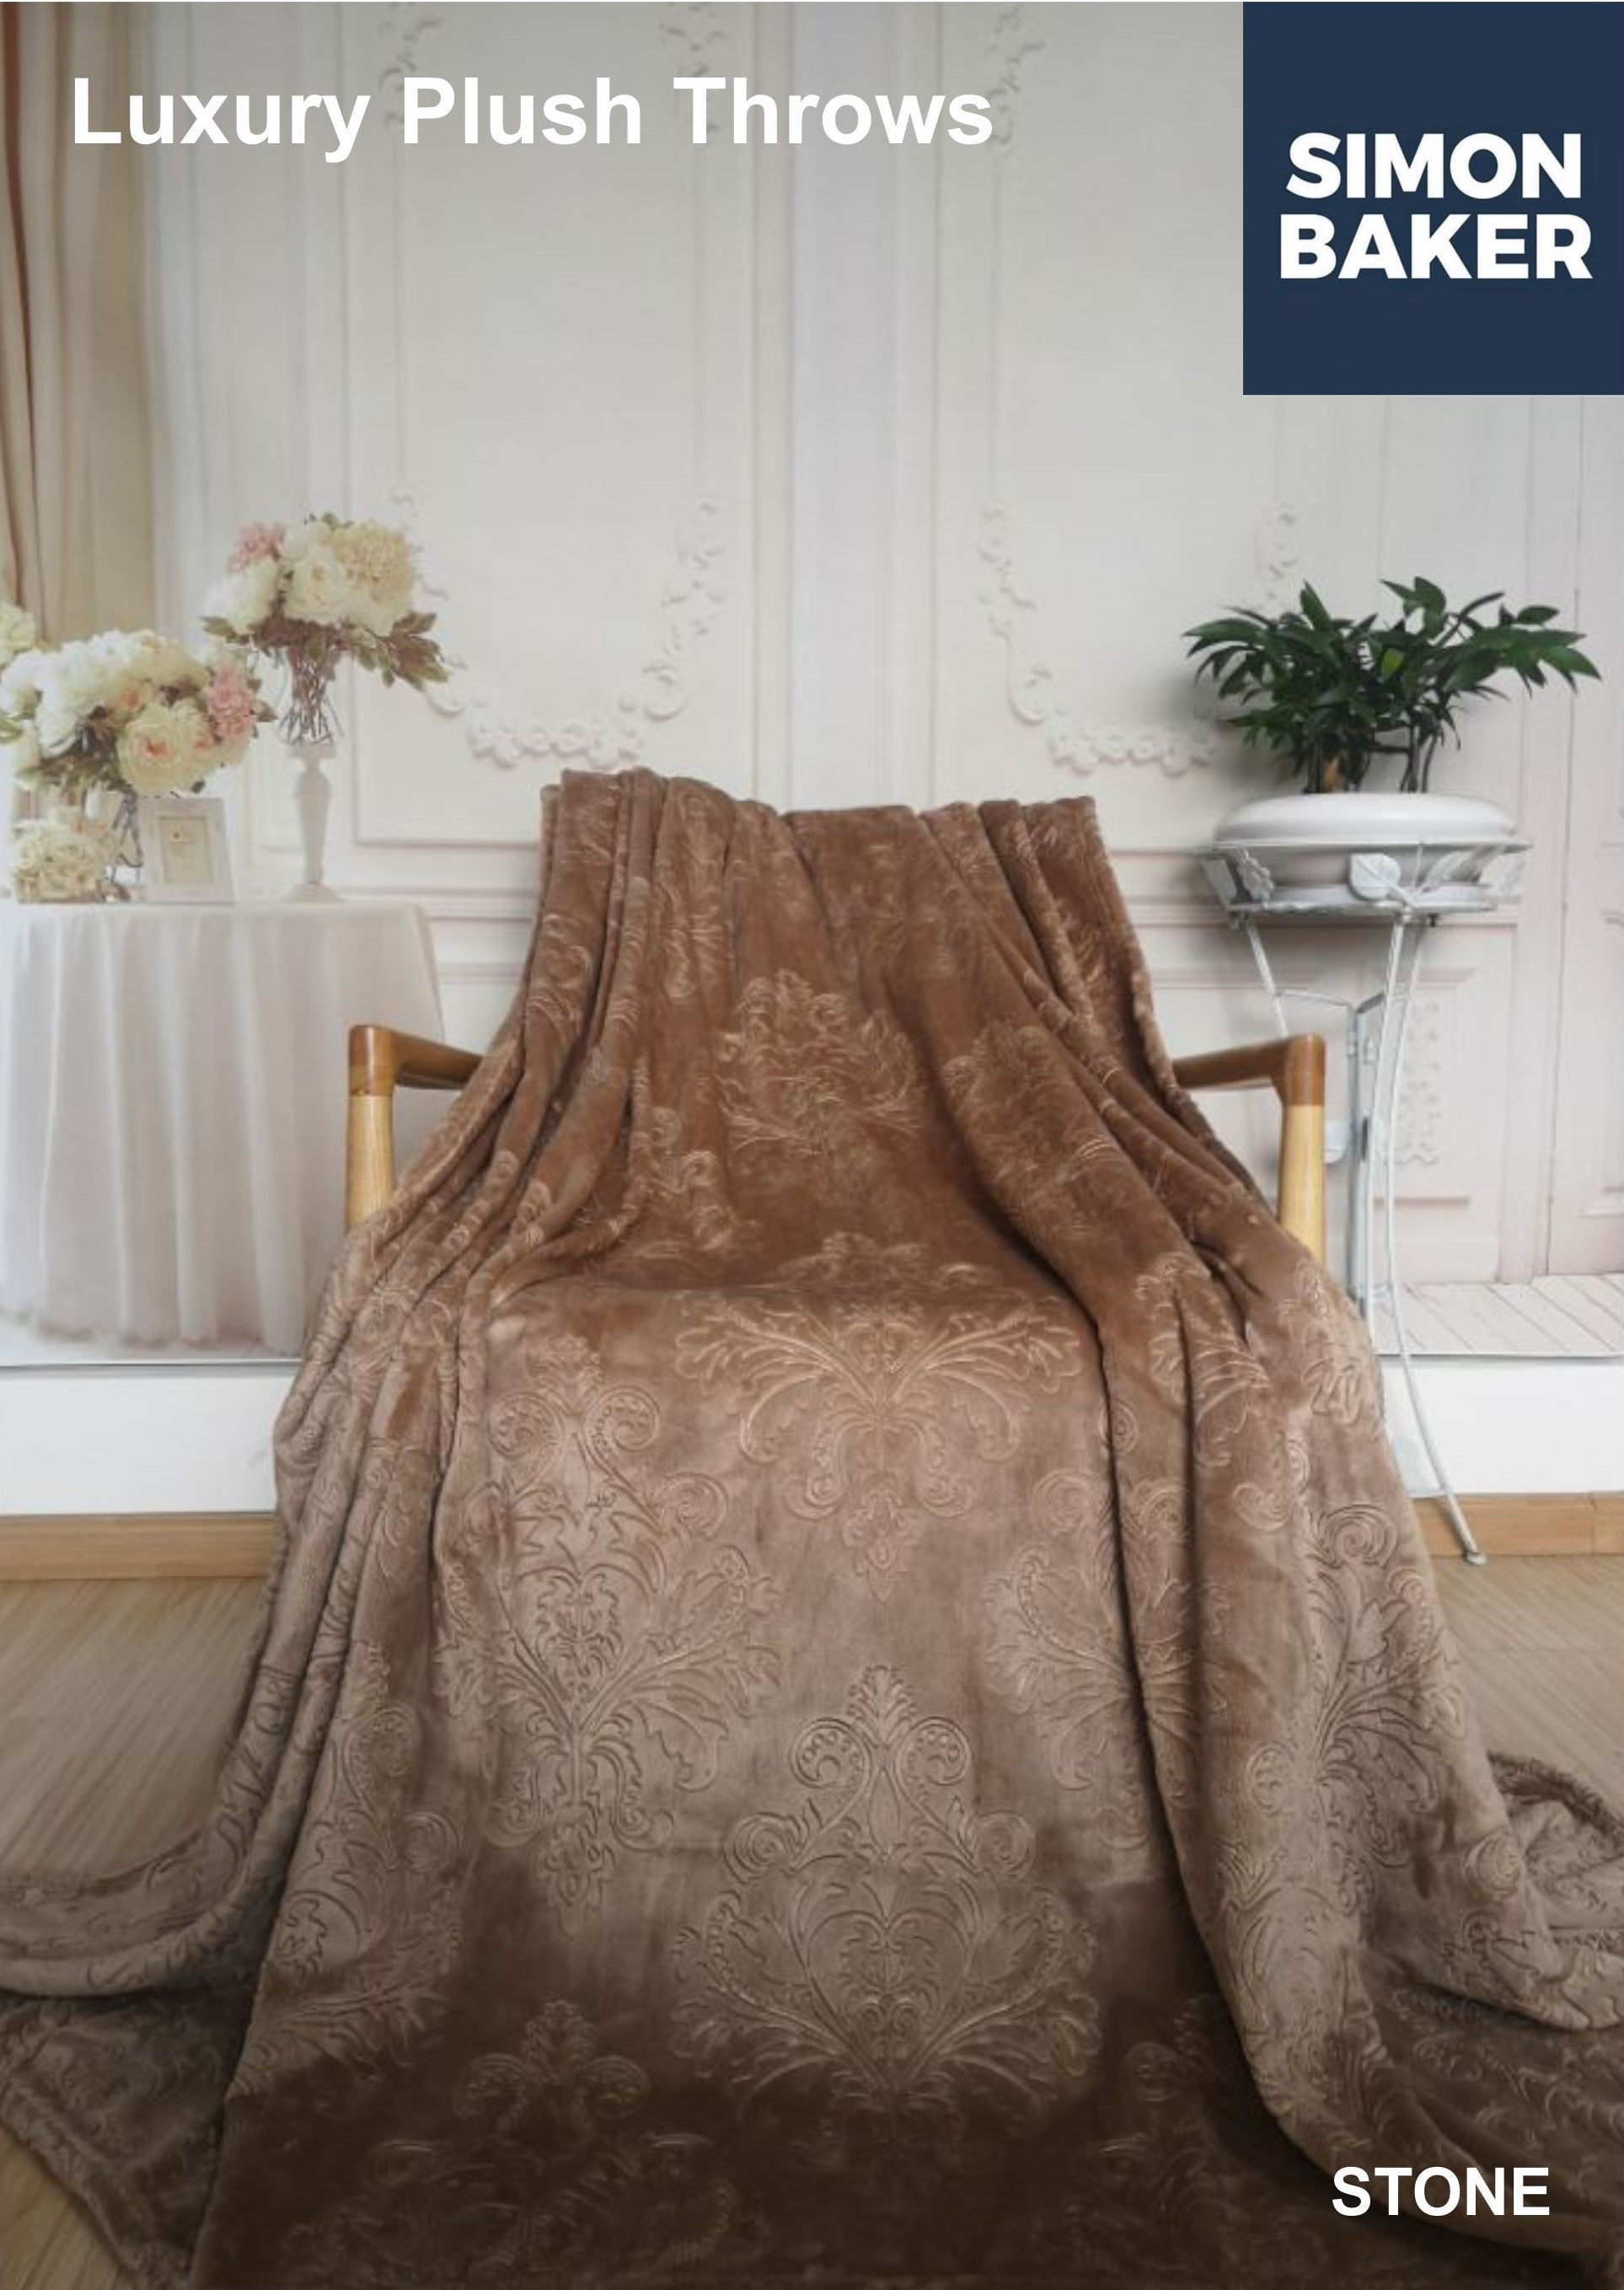 Luxury Plush Blanket Stone (Available in Plain or Embossed)